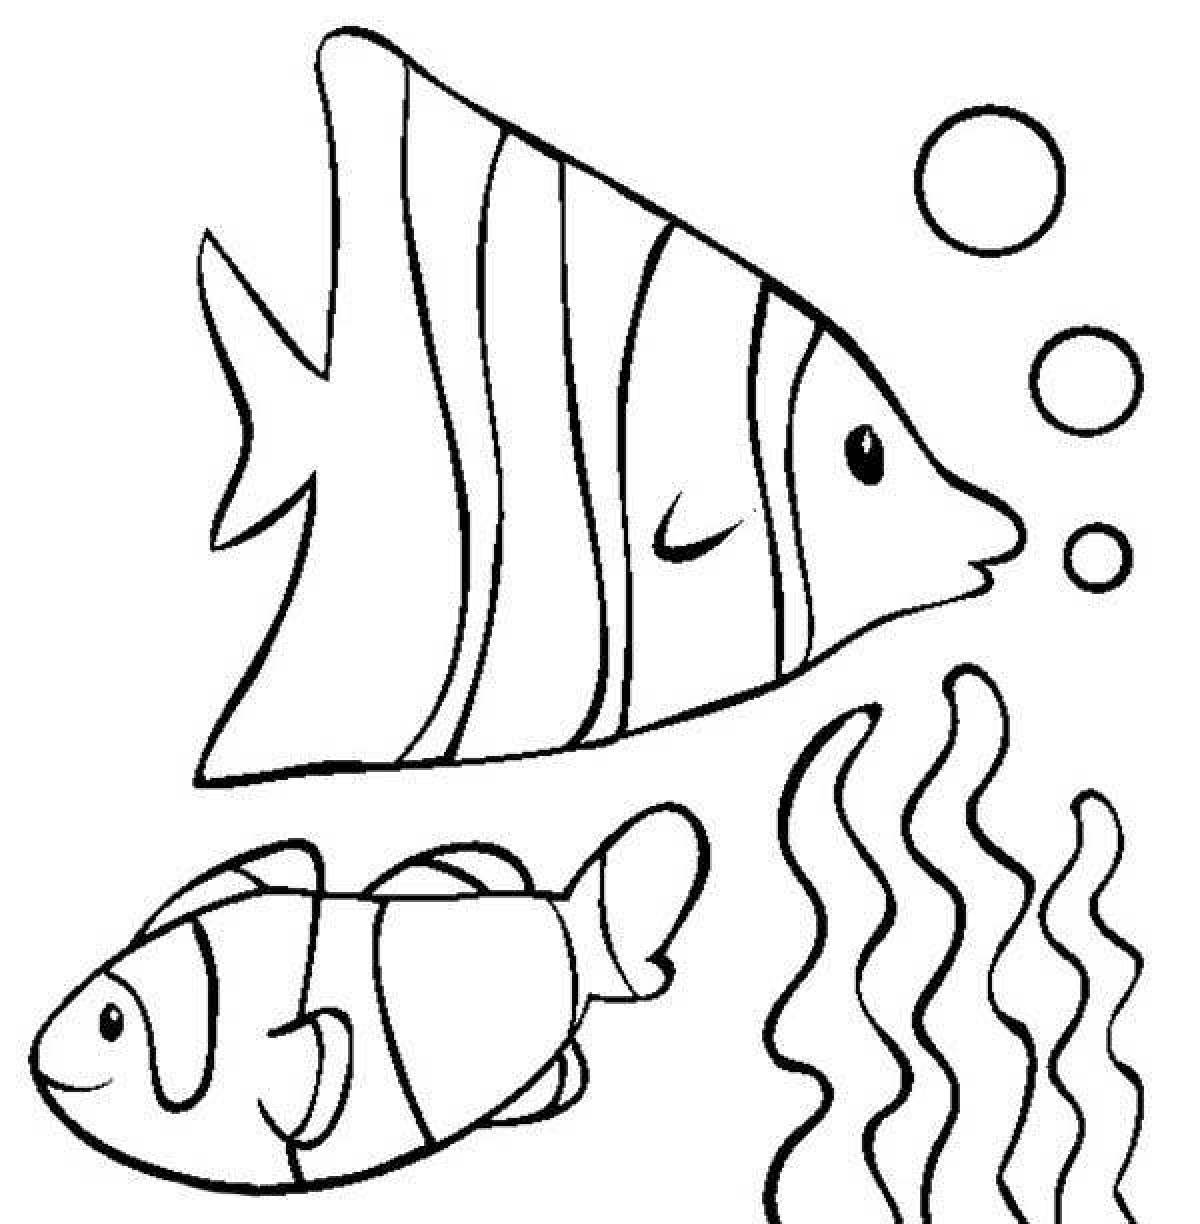 A wonderful fish coloring book for 3-4 year olds